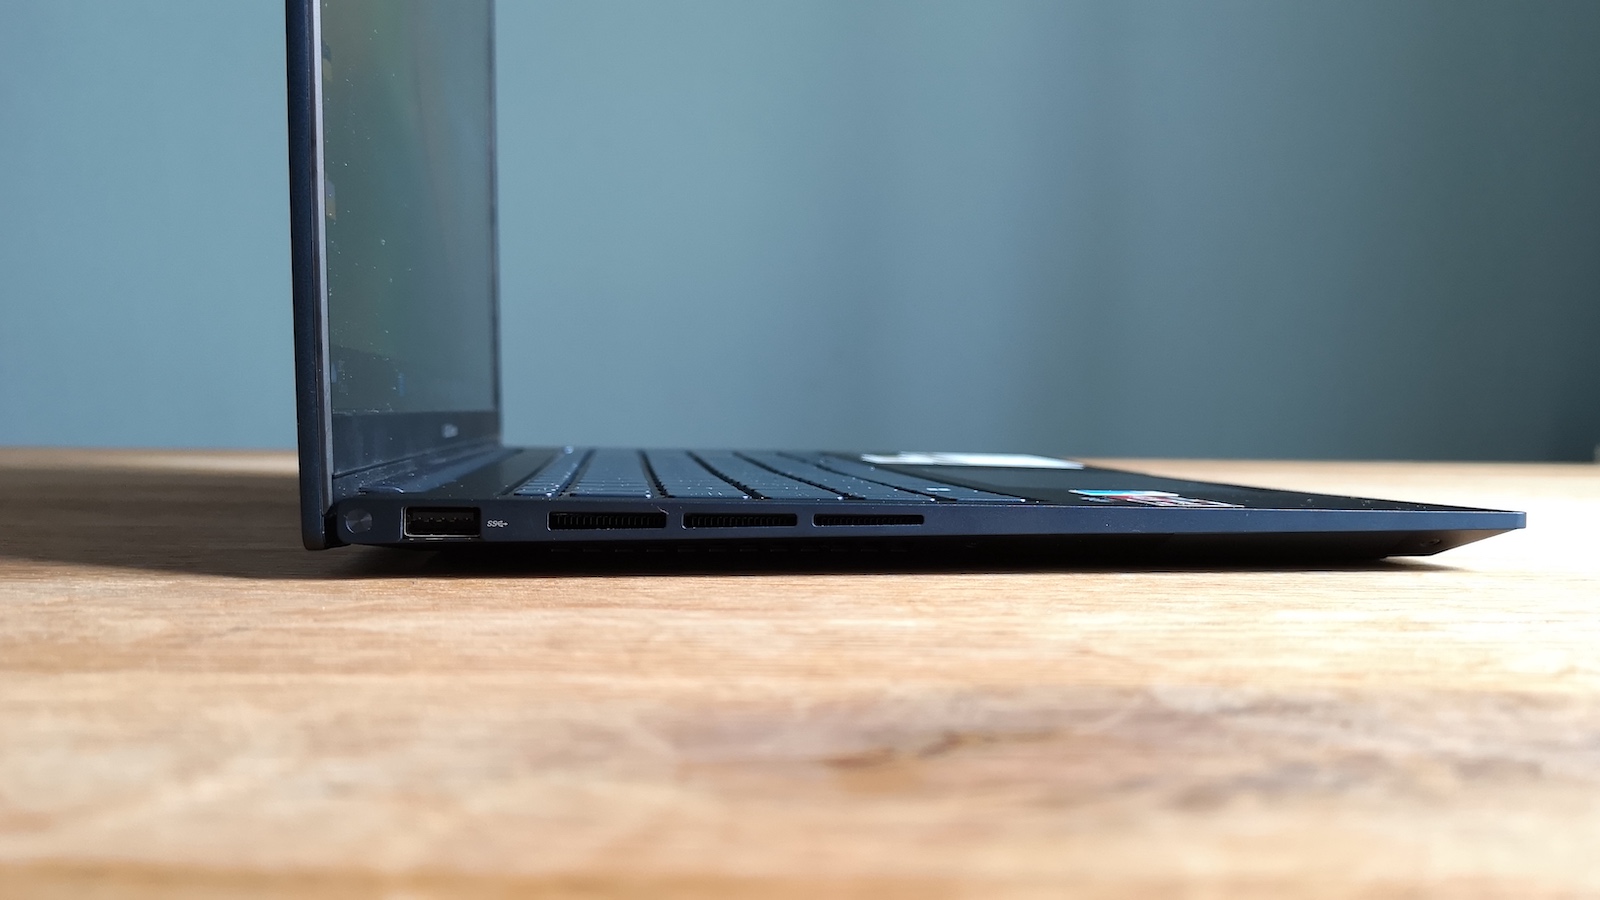 The Type-A USB port on the left hand edge of the Asus Zenbook 15 OLED